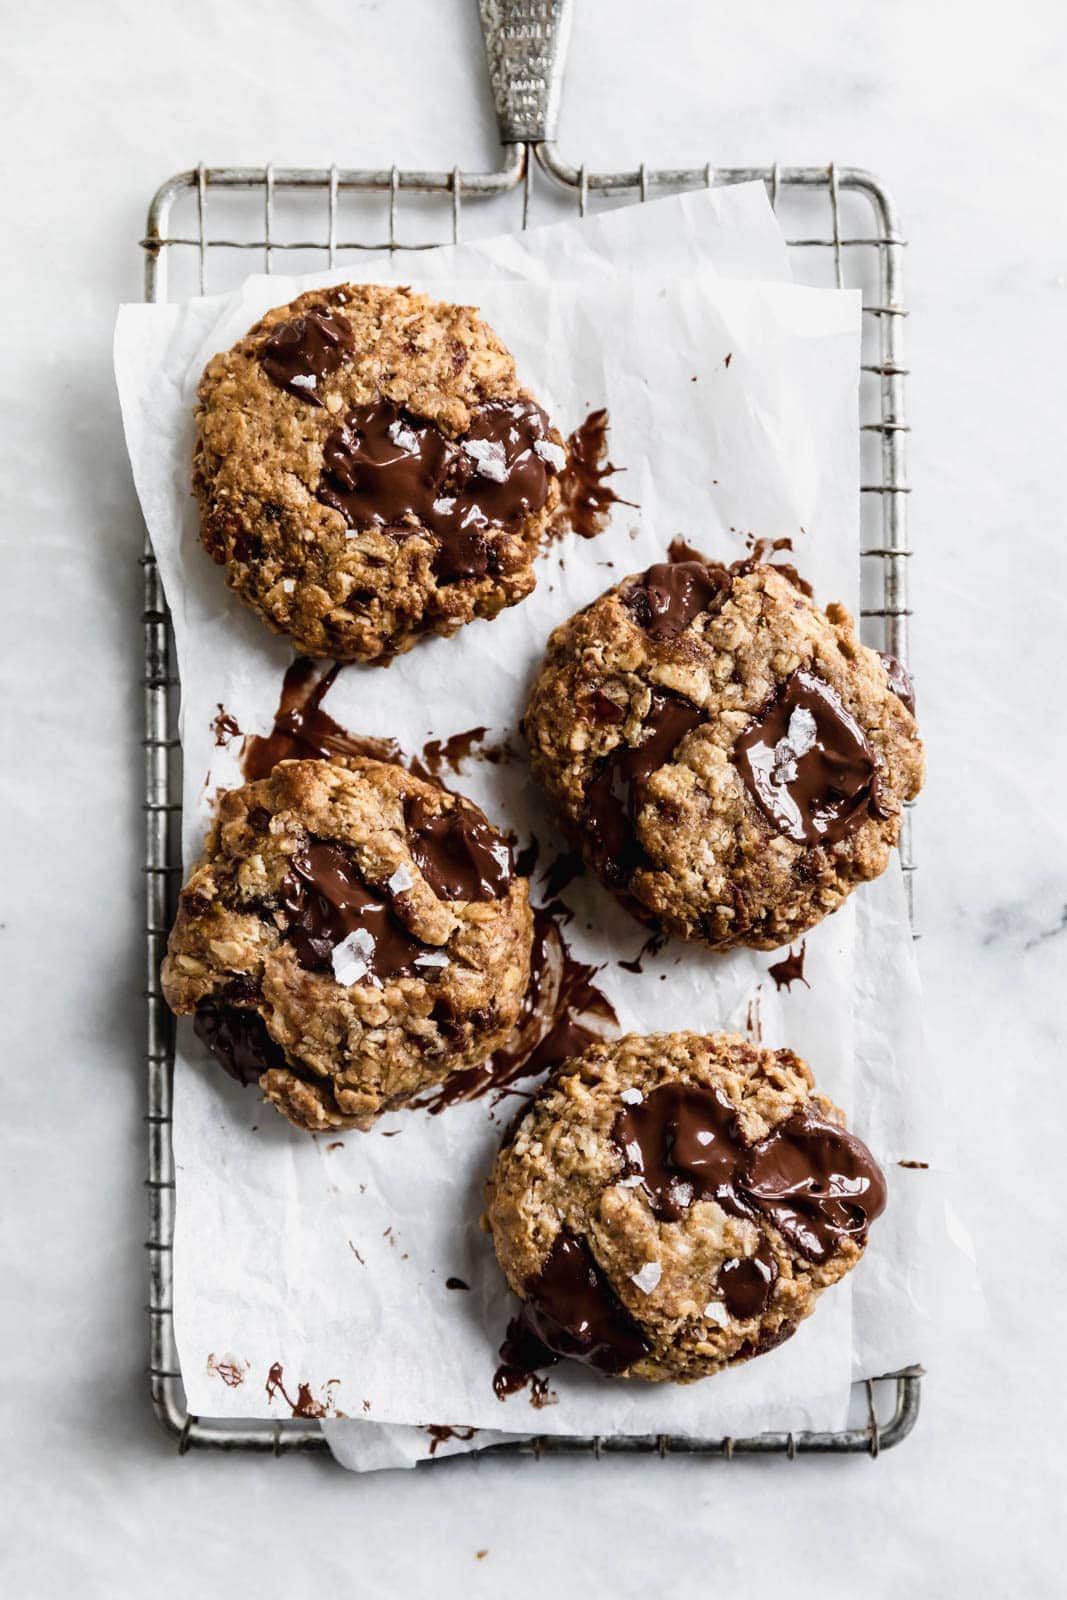 Yes these Tahini Oatmeal Chocolate Chunk Cookies are vegan, gluten free, and refined sugar free, but they sure as heck don't taste like a healthy food.